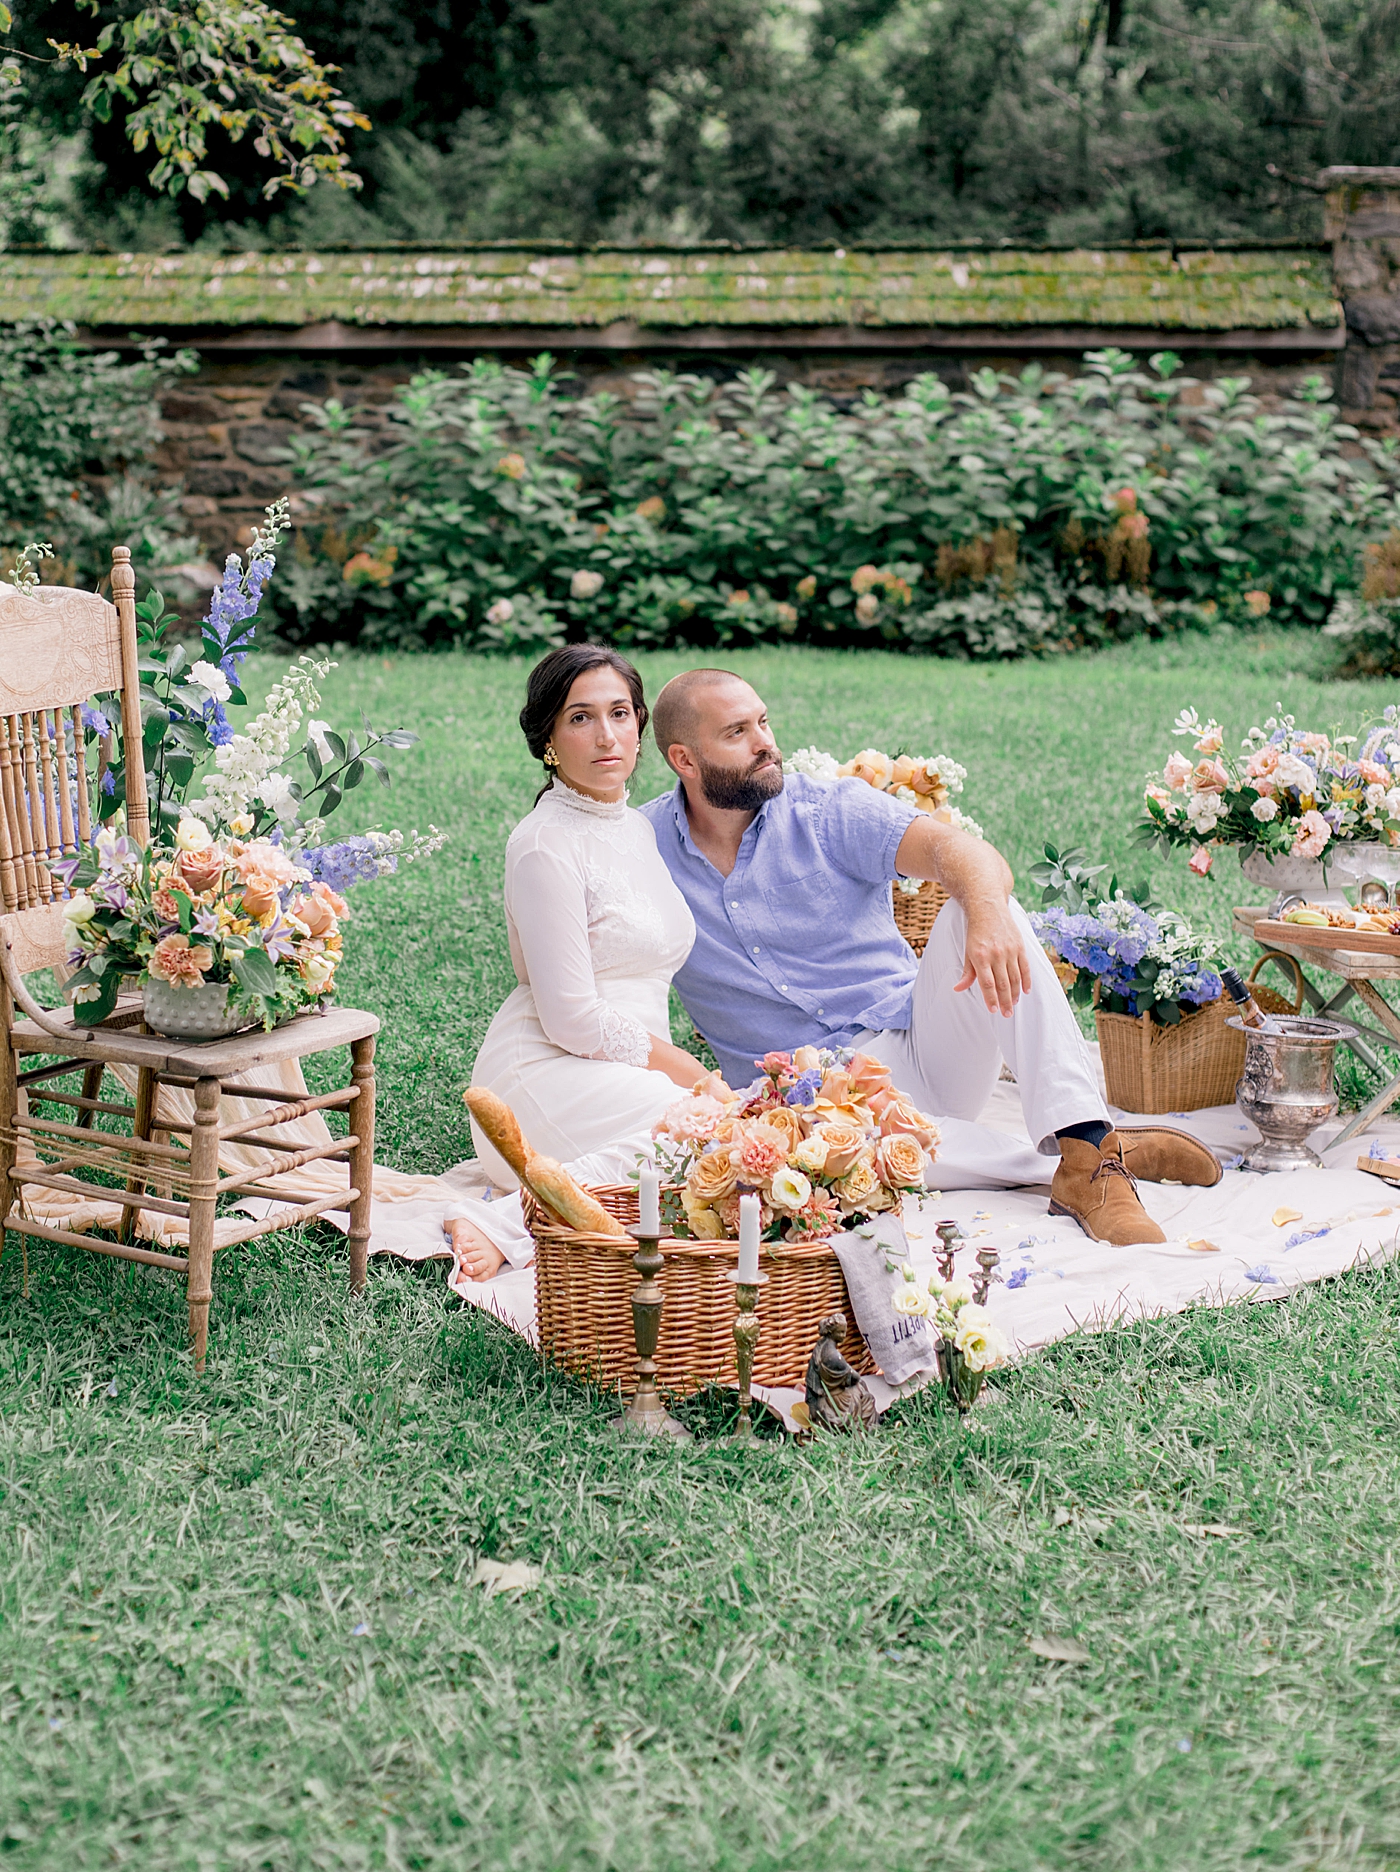 Bride and groom sitting on a picnic blanket surrounded by flowers | Image by Hope Helmuth Photography